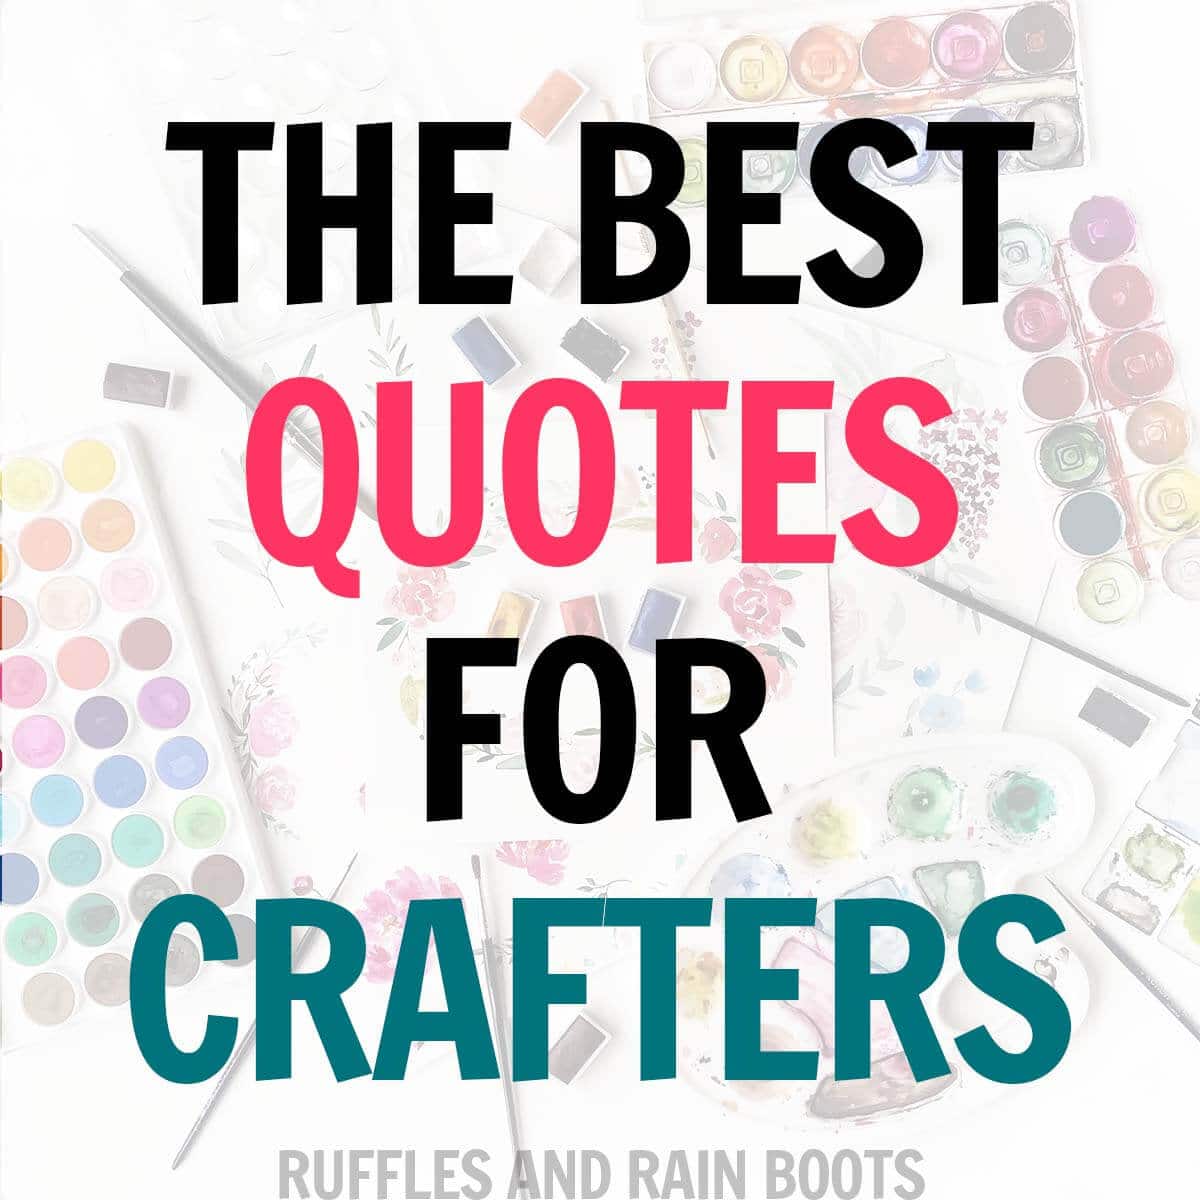 Square image of white overlay on background of paints with text which reads the best quotes for crafters.